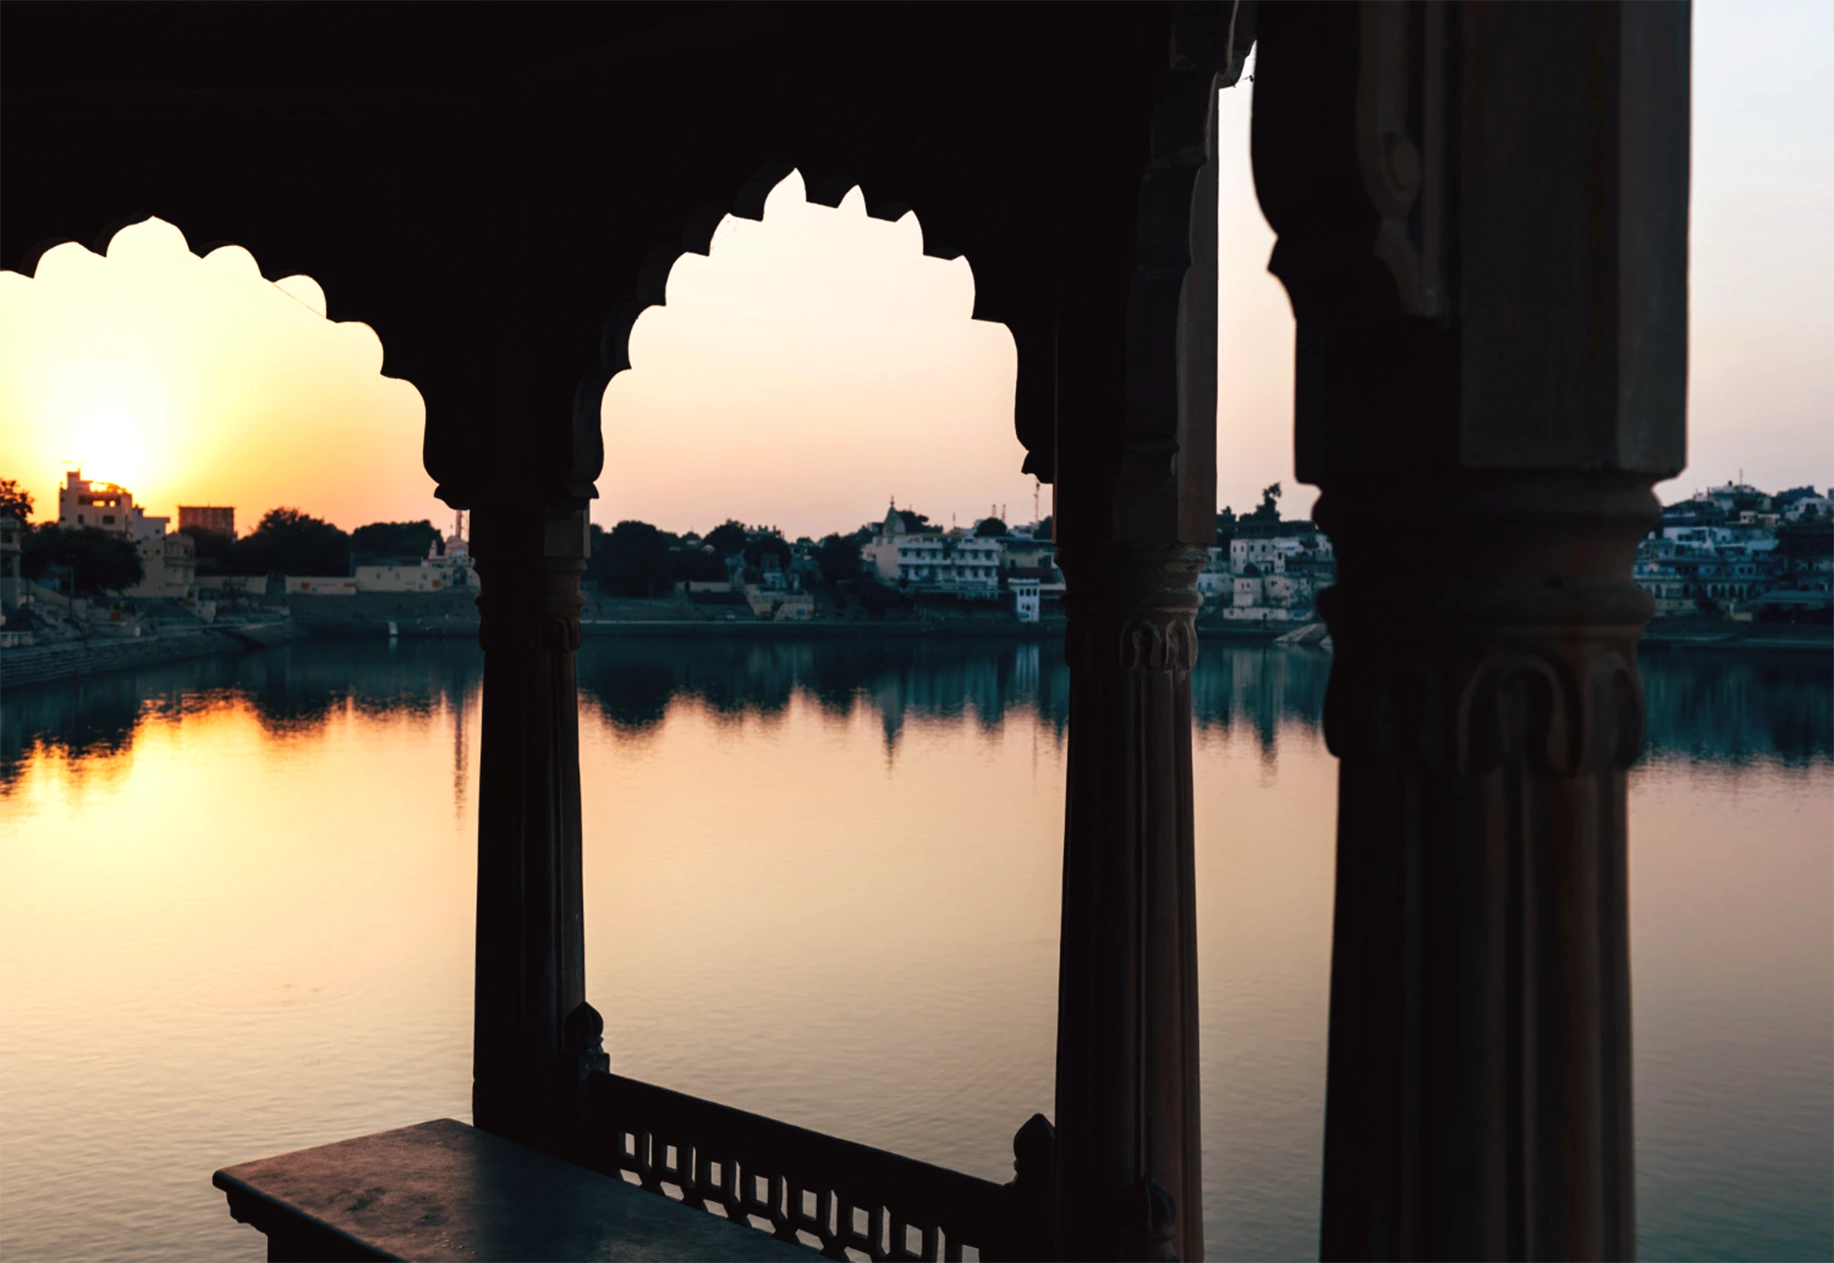 One Day Ajmer & Pushkar Sightseeing Tour by Cab